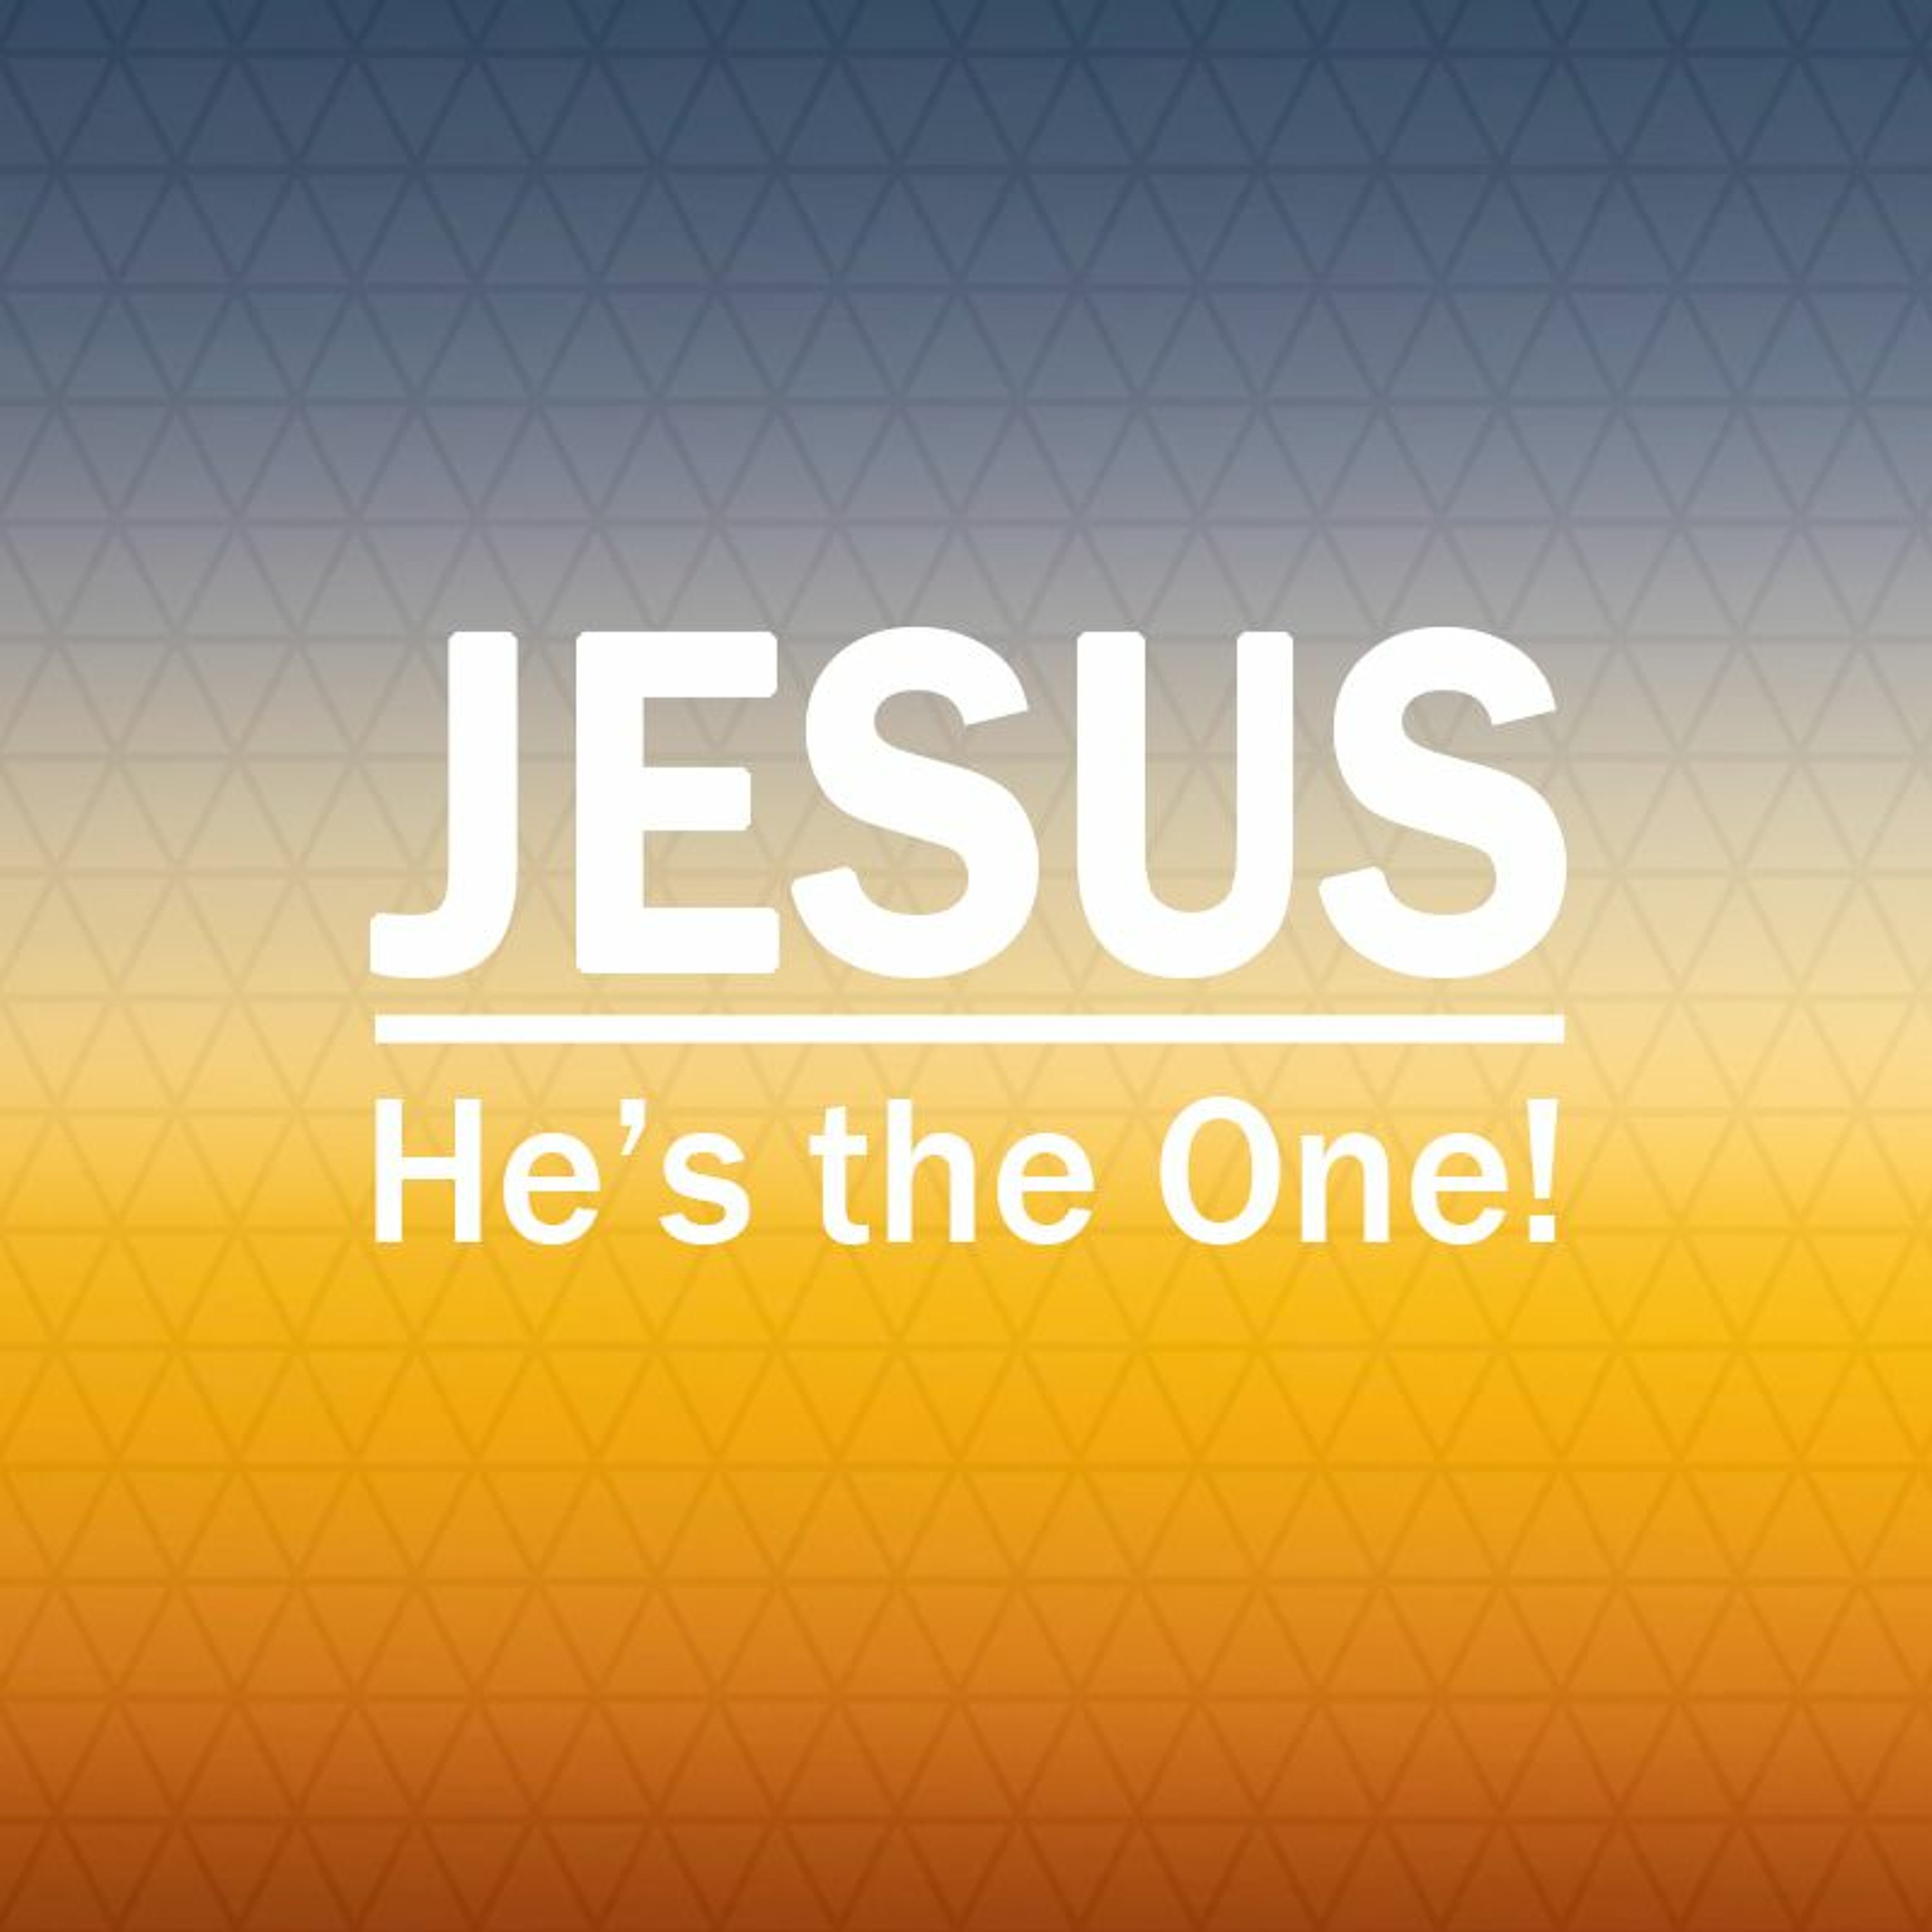 Jesus - He’s the One! | The One who has authority